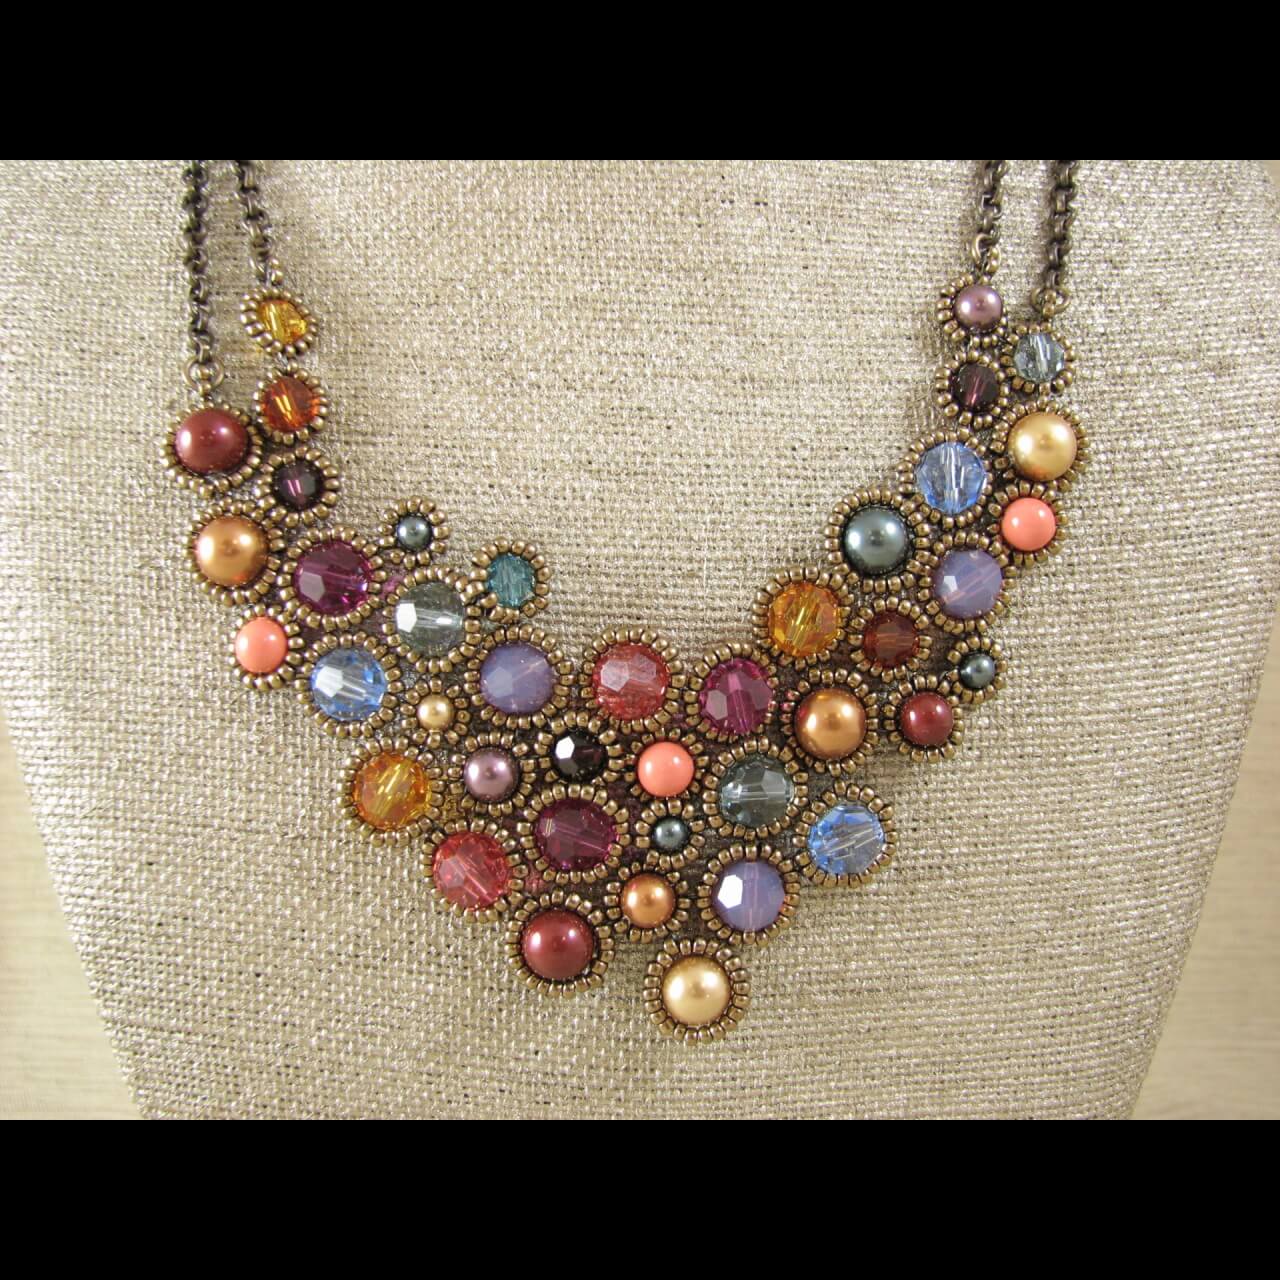 necklace made of small glass beads cased in metal